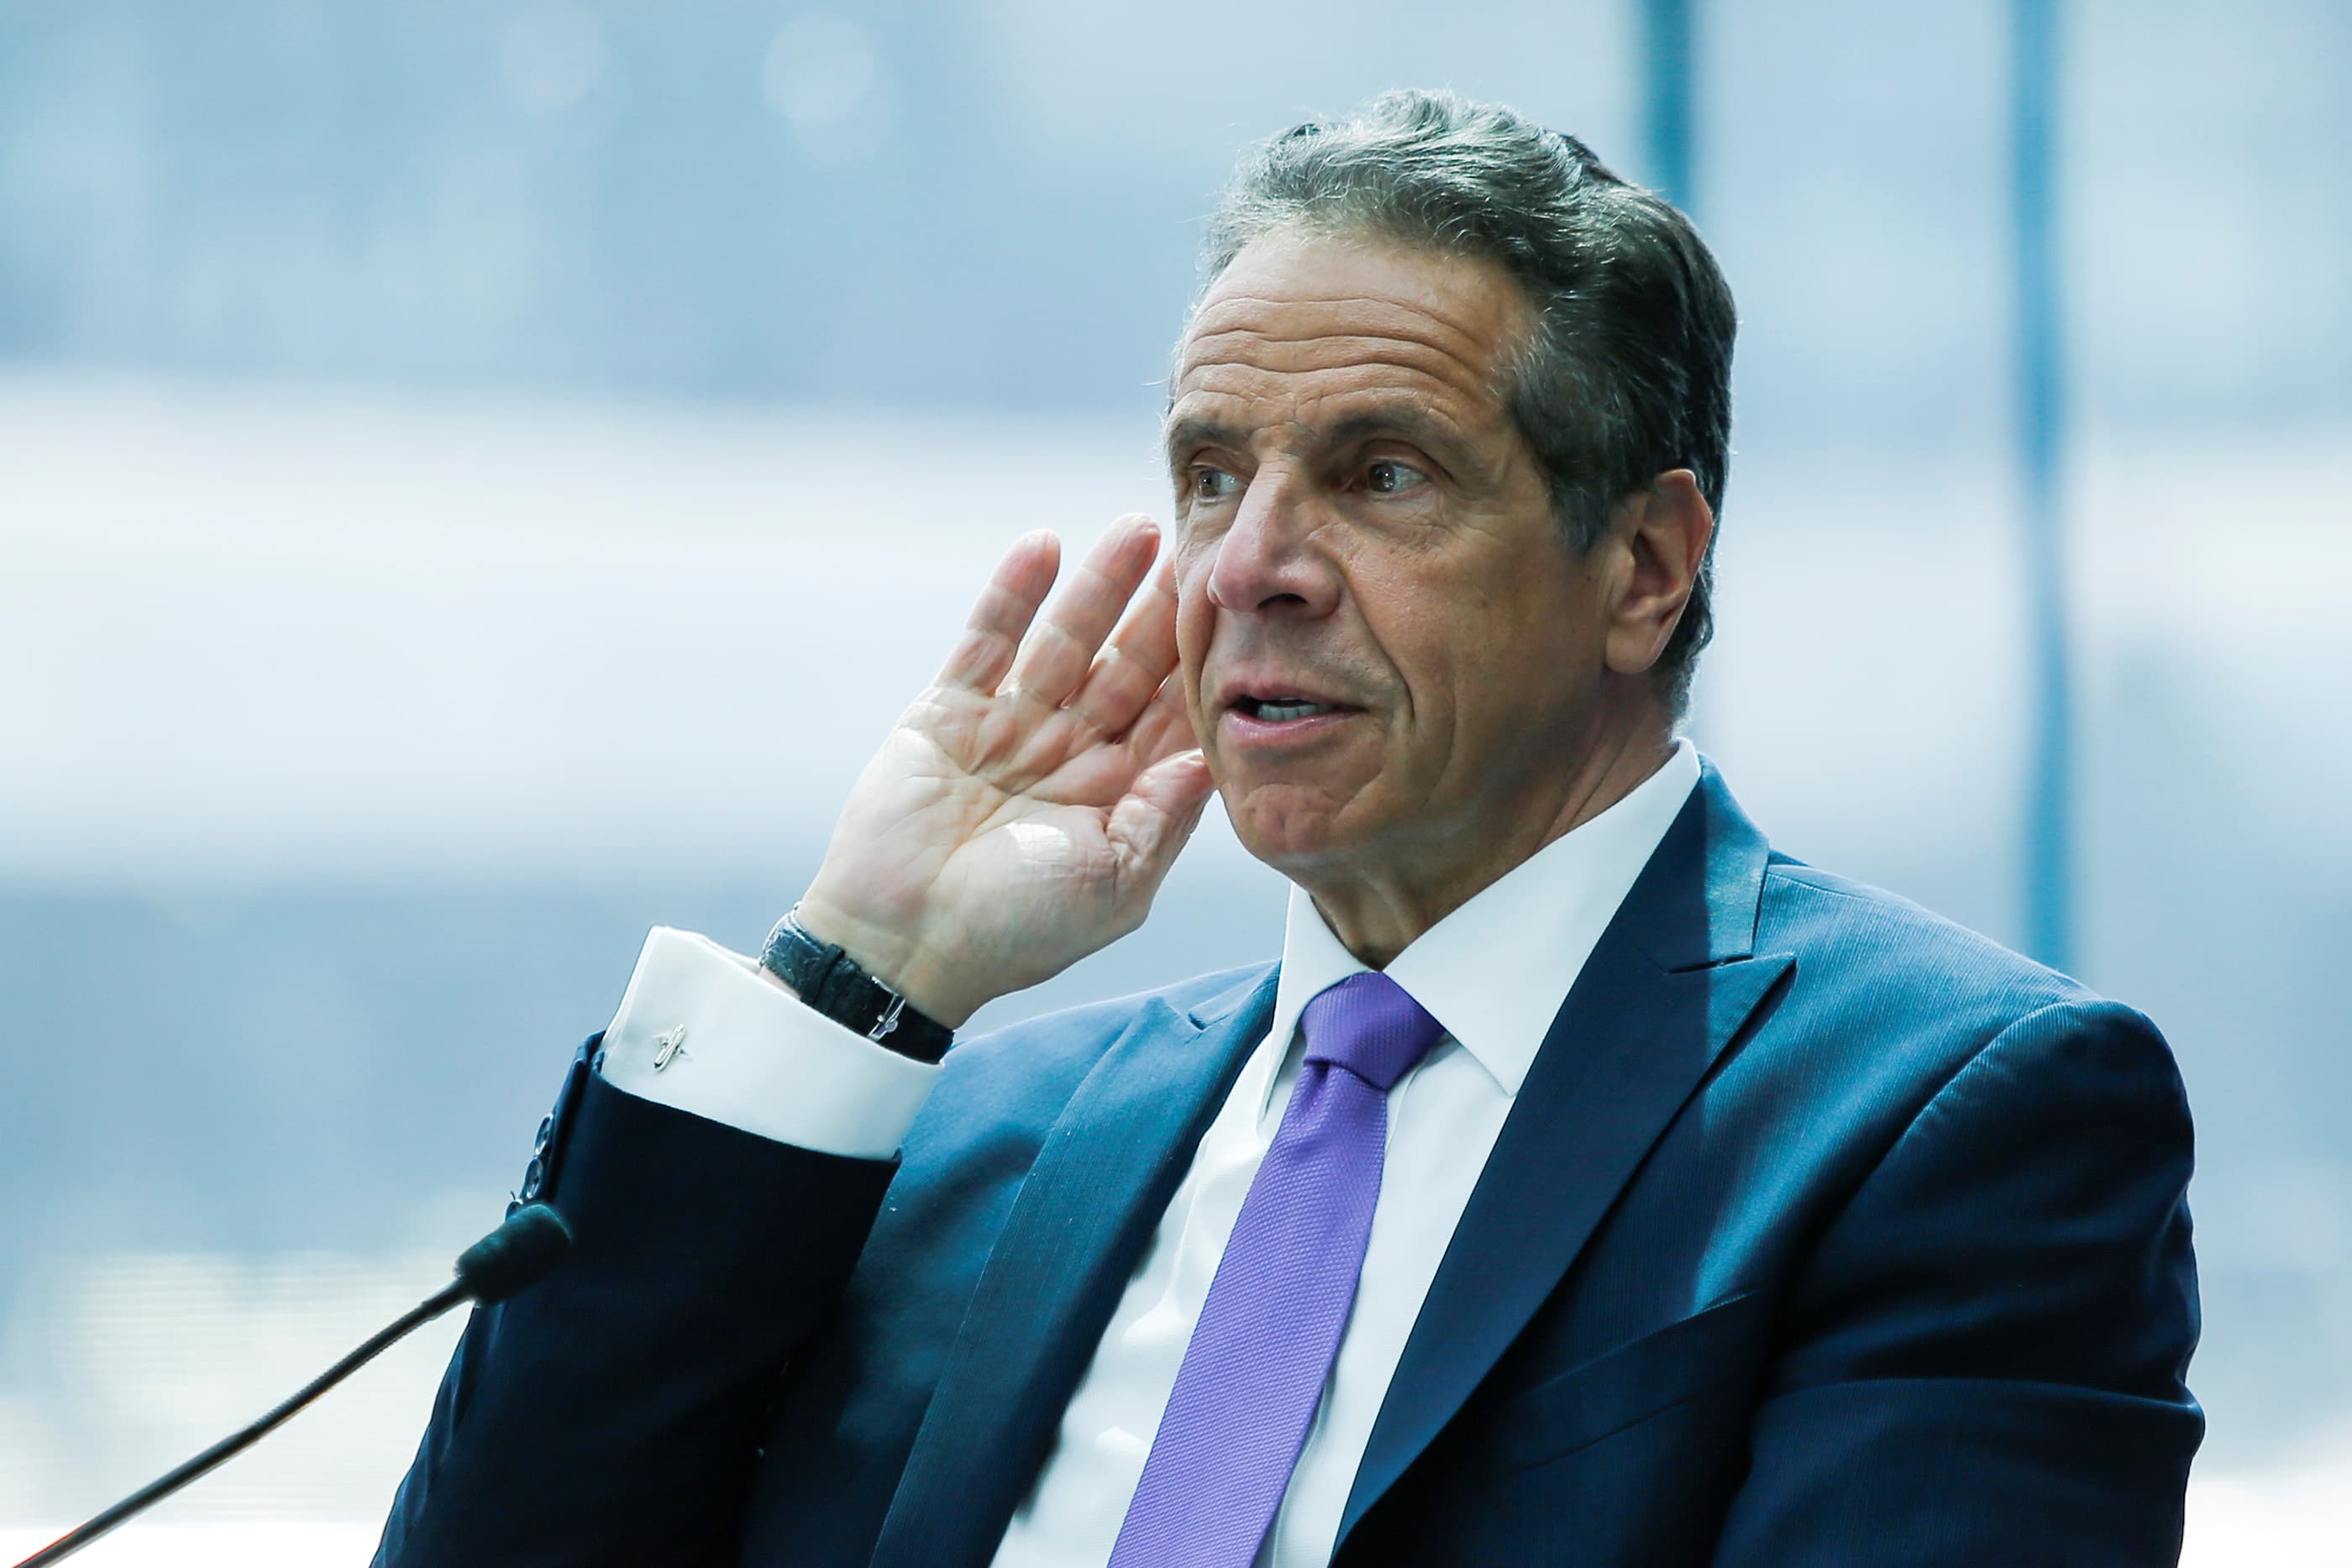 New York Assembly will suspend Andrew Cuomo impeachment investigation after gove..